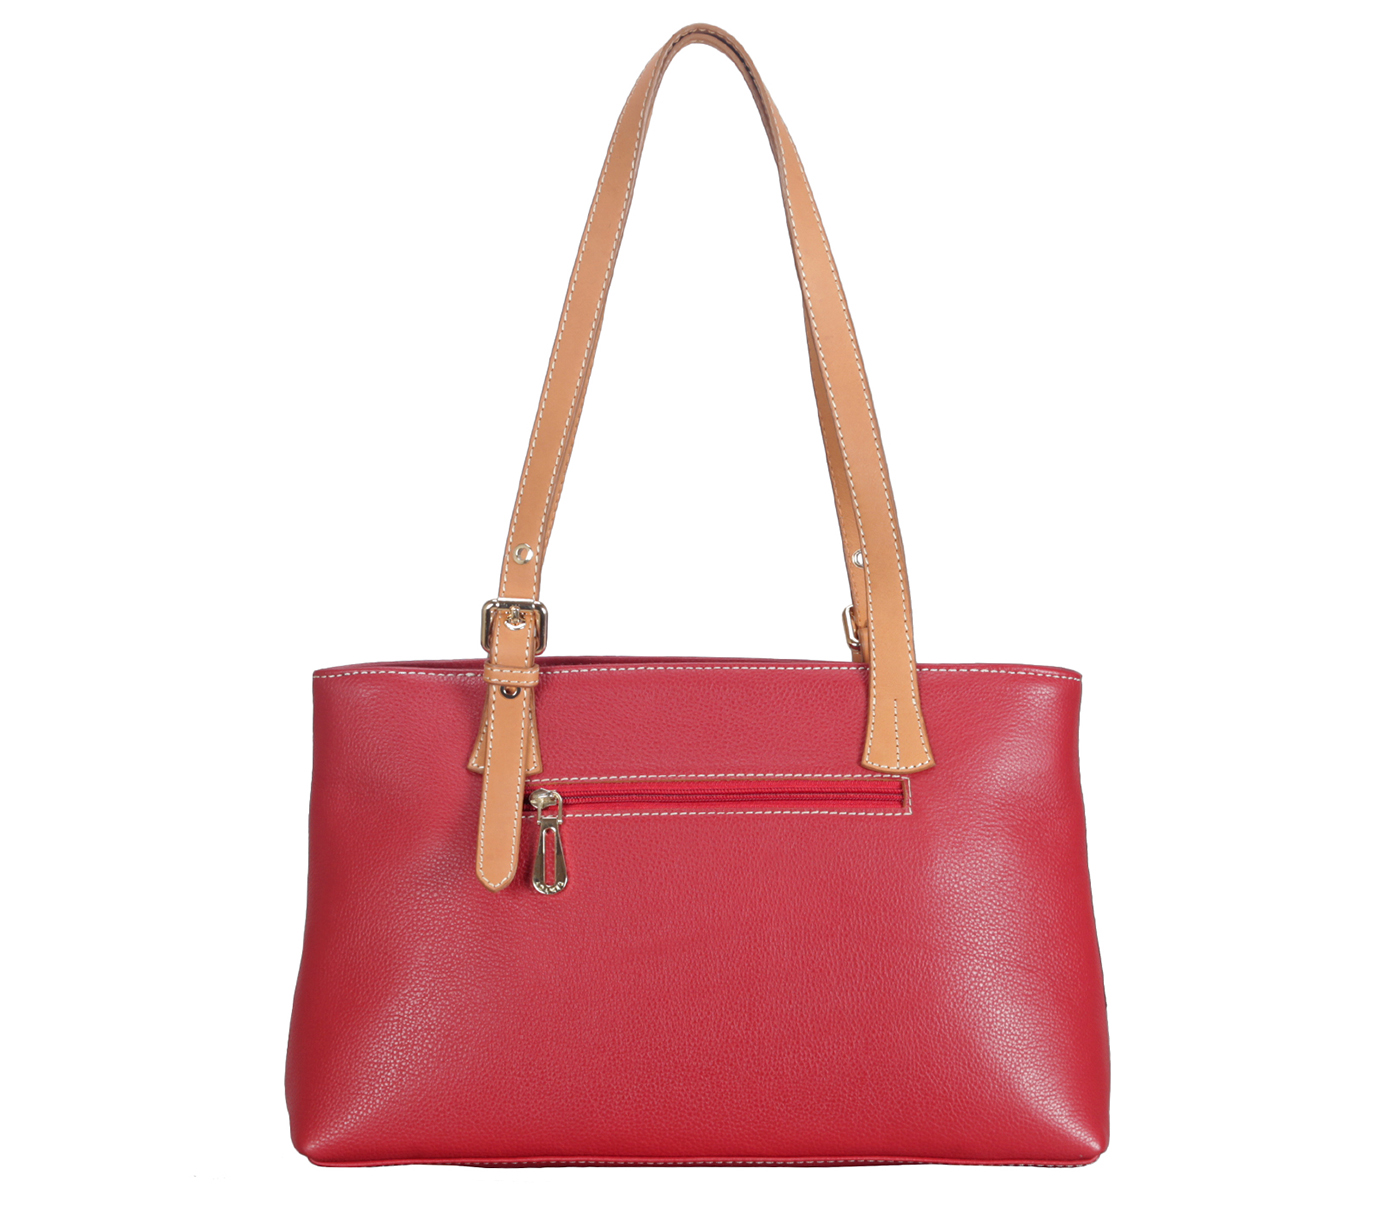 B837-Karla-Double handle Shoulder bag in Genuine Leather - Red